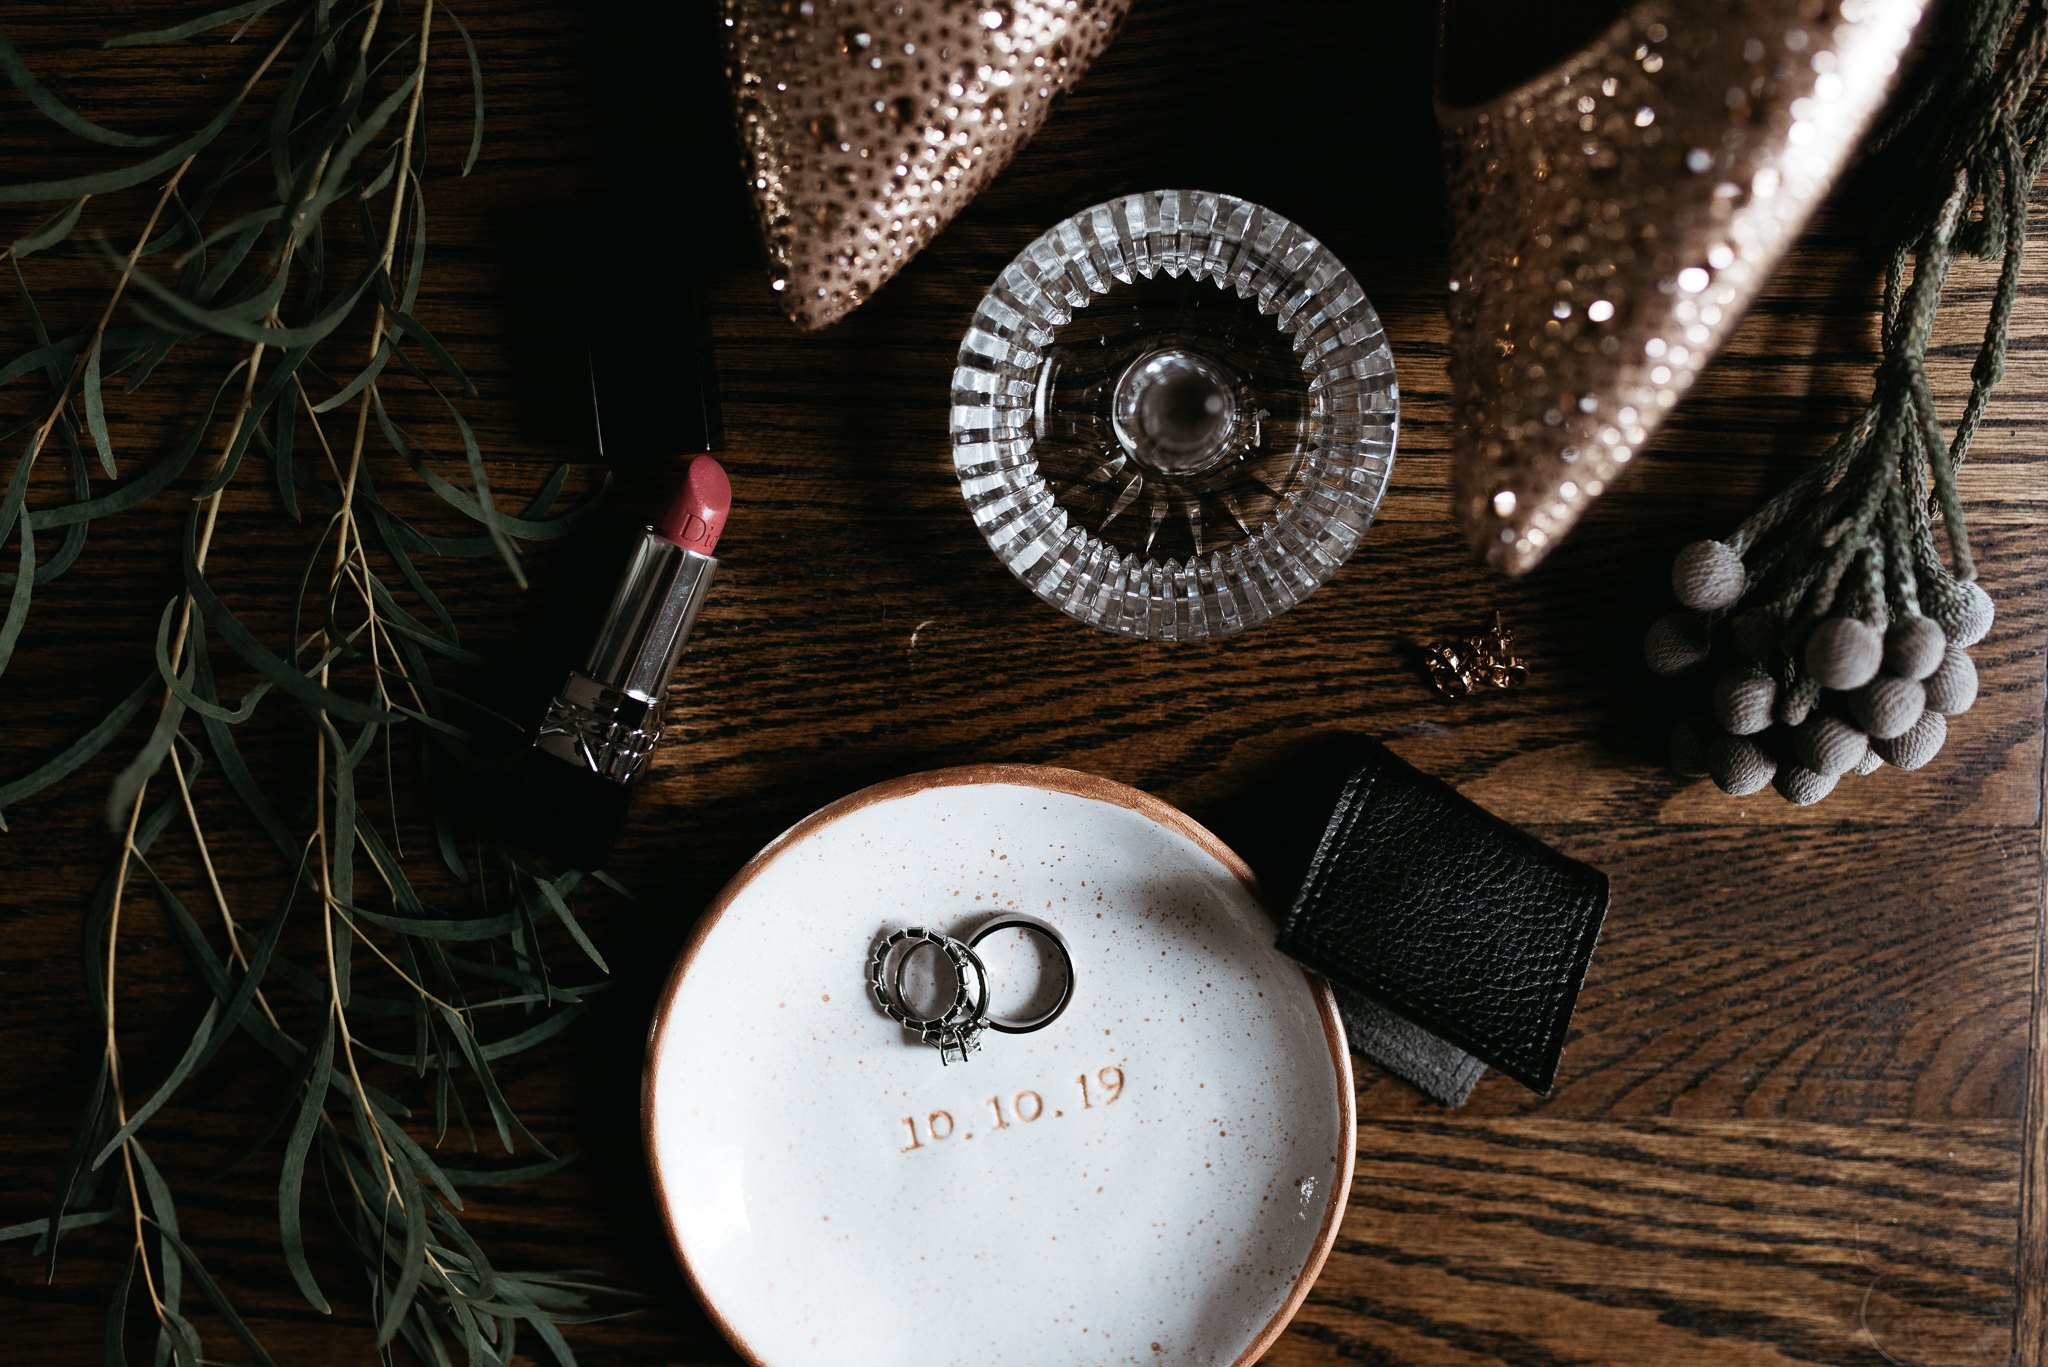 Moody photograph of romantic wedding details featuring gold rhinestone heels, Dior lipstick, a handmade ring dish with wedding rings on it, greenery from the bouquet and small gold earrings.